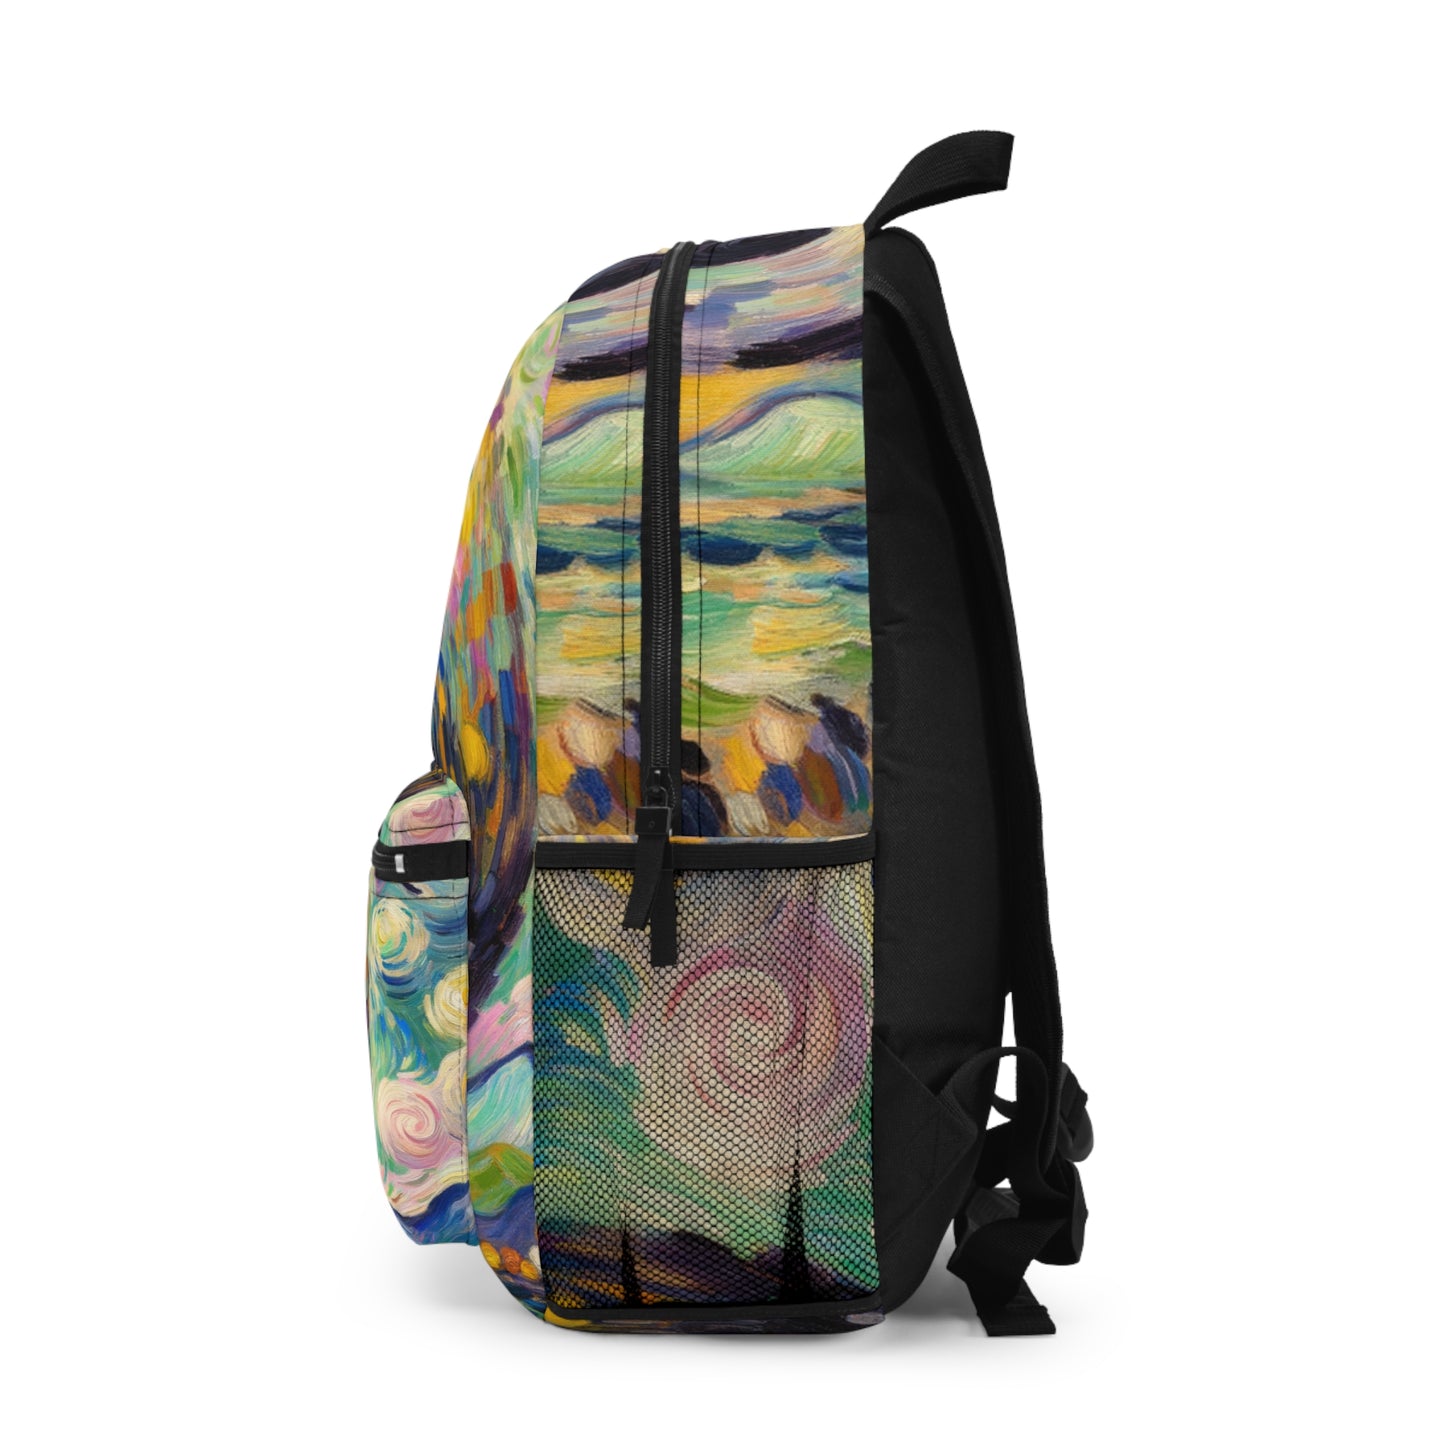 "Spectral Duality: An Impressionist Balance" - Backpack